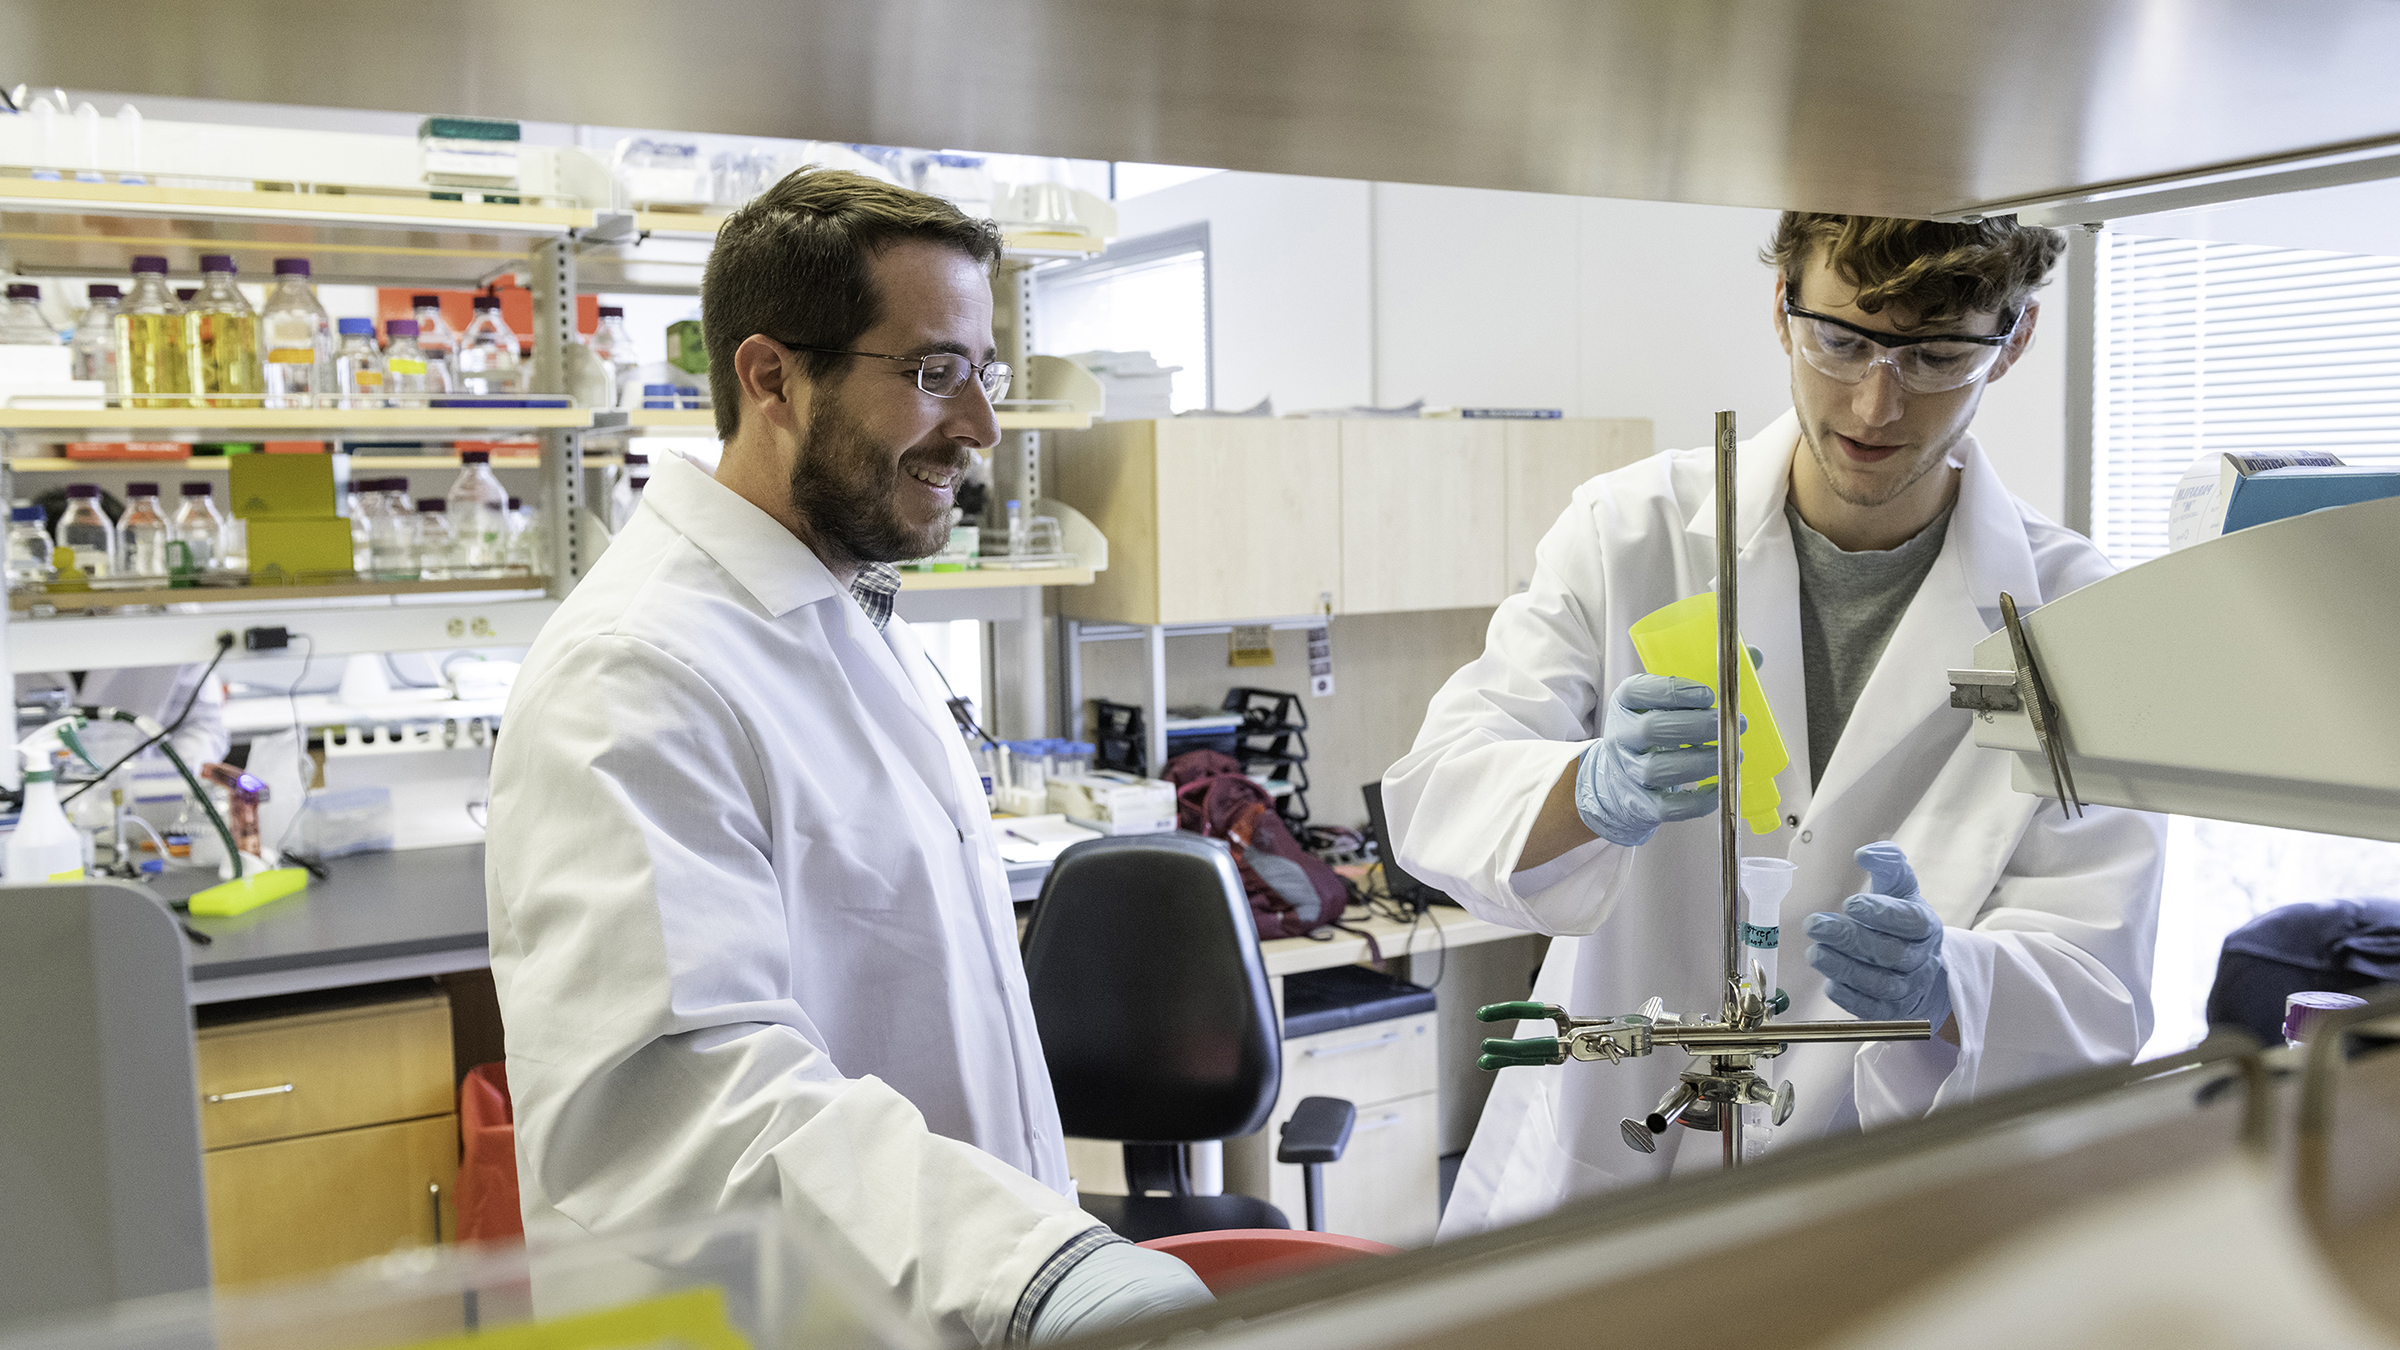 Two scientists in lab coats work at a lab bench.